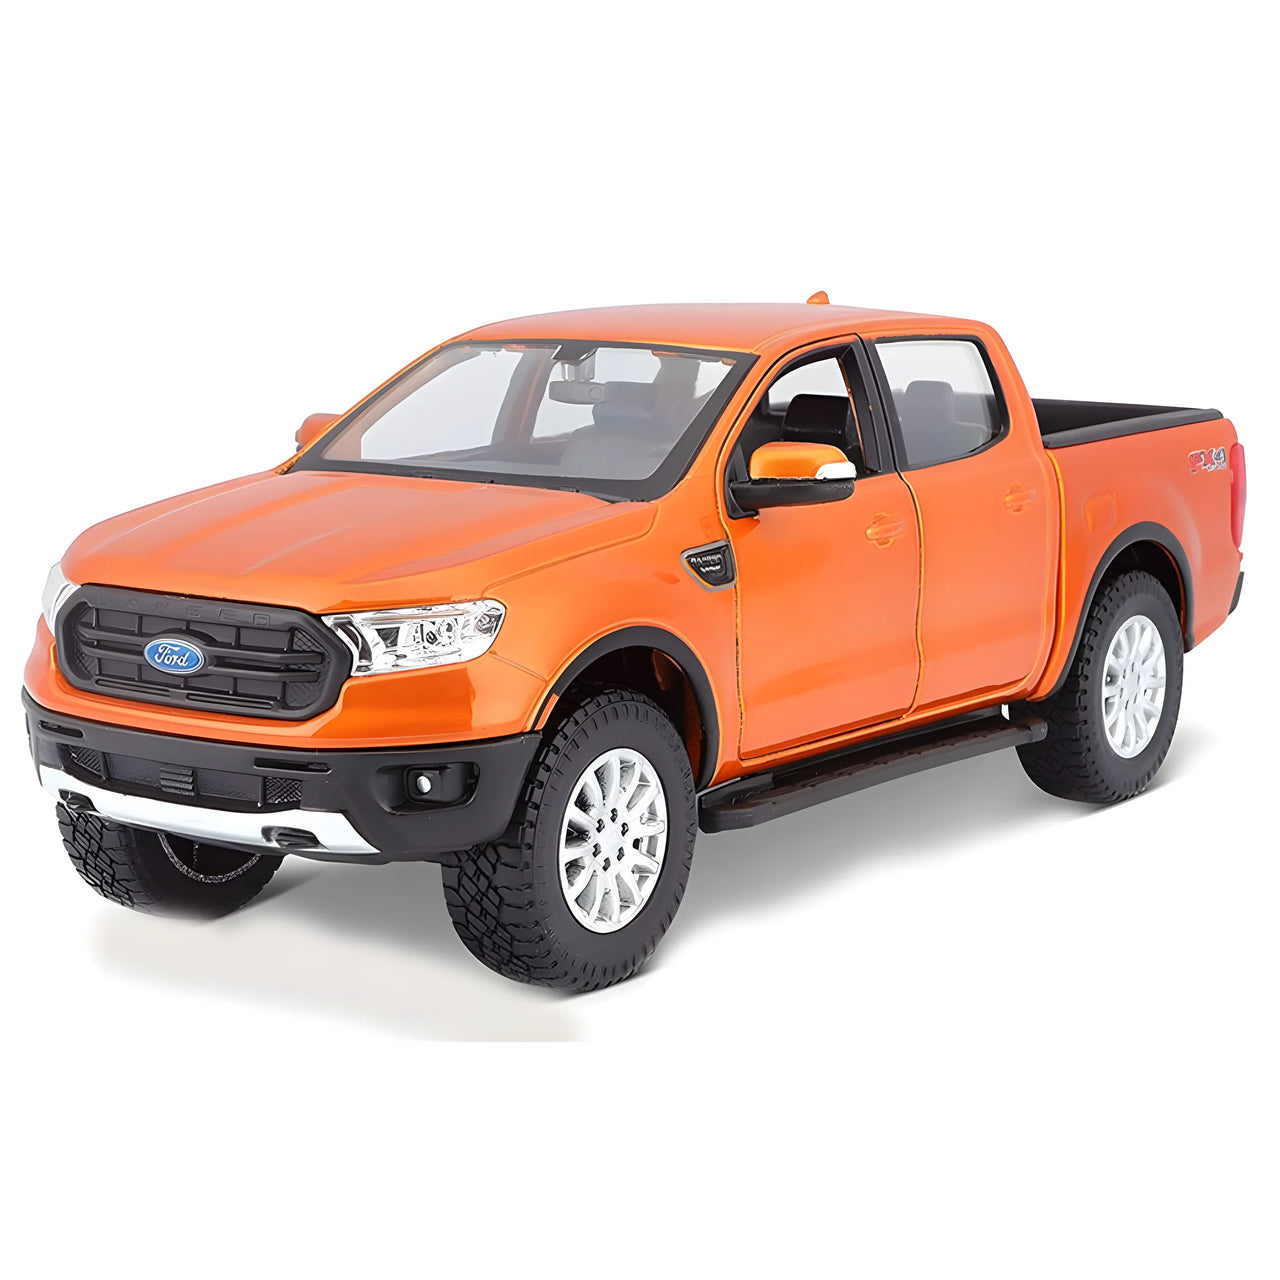 31521OR Ford Ranger Pickup Truck 2019 Scale 1:27